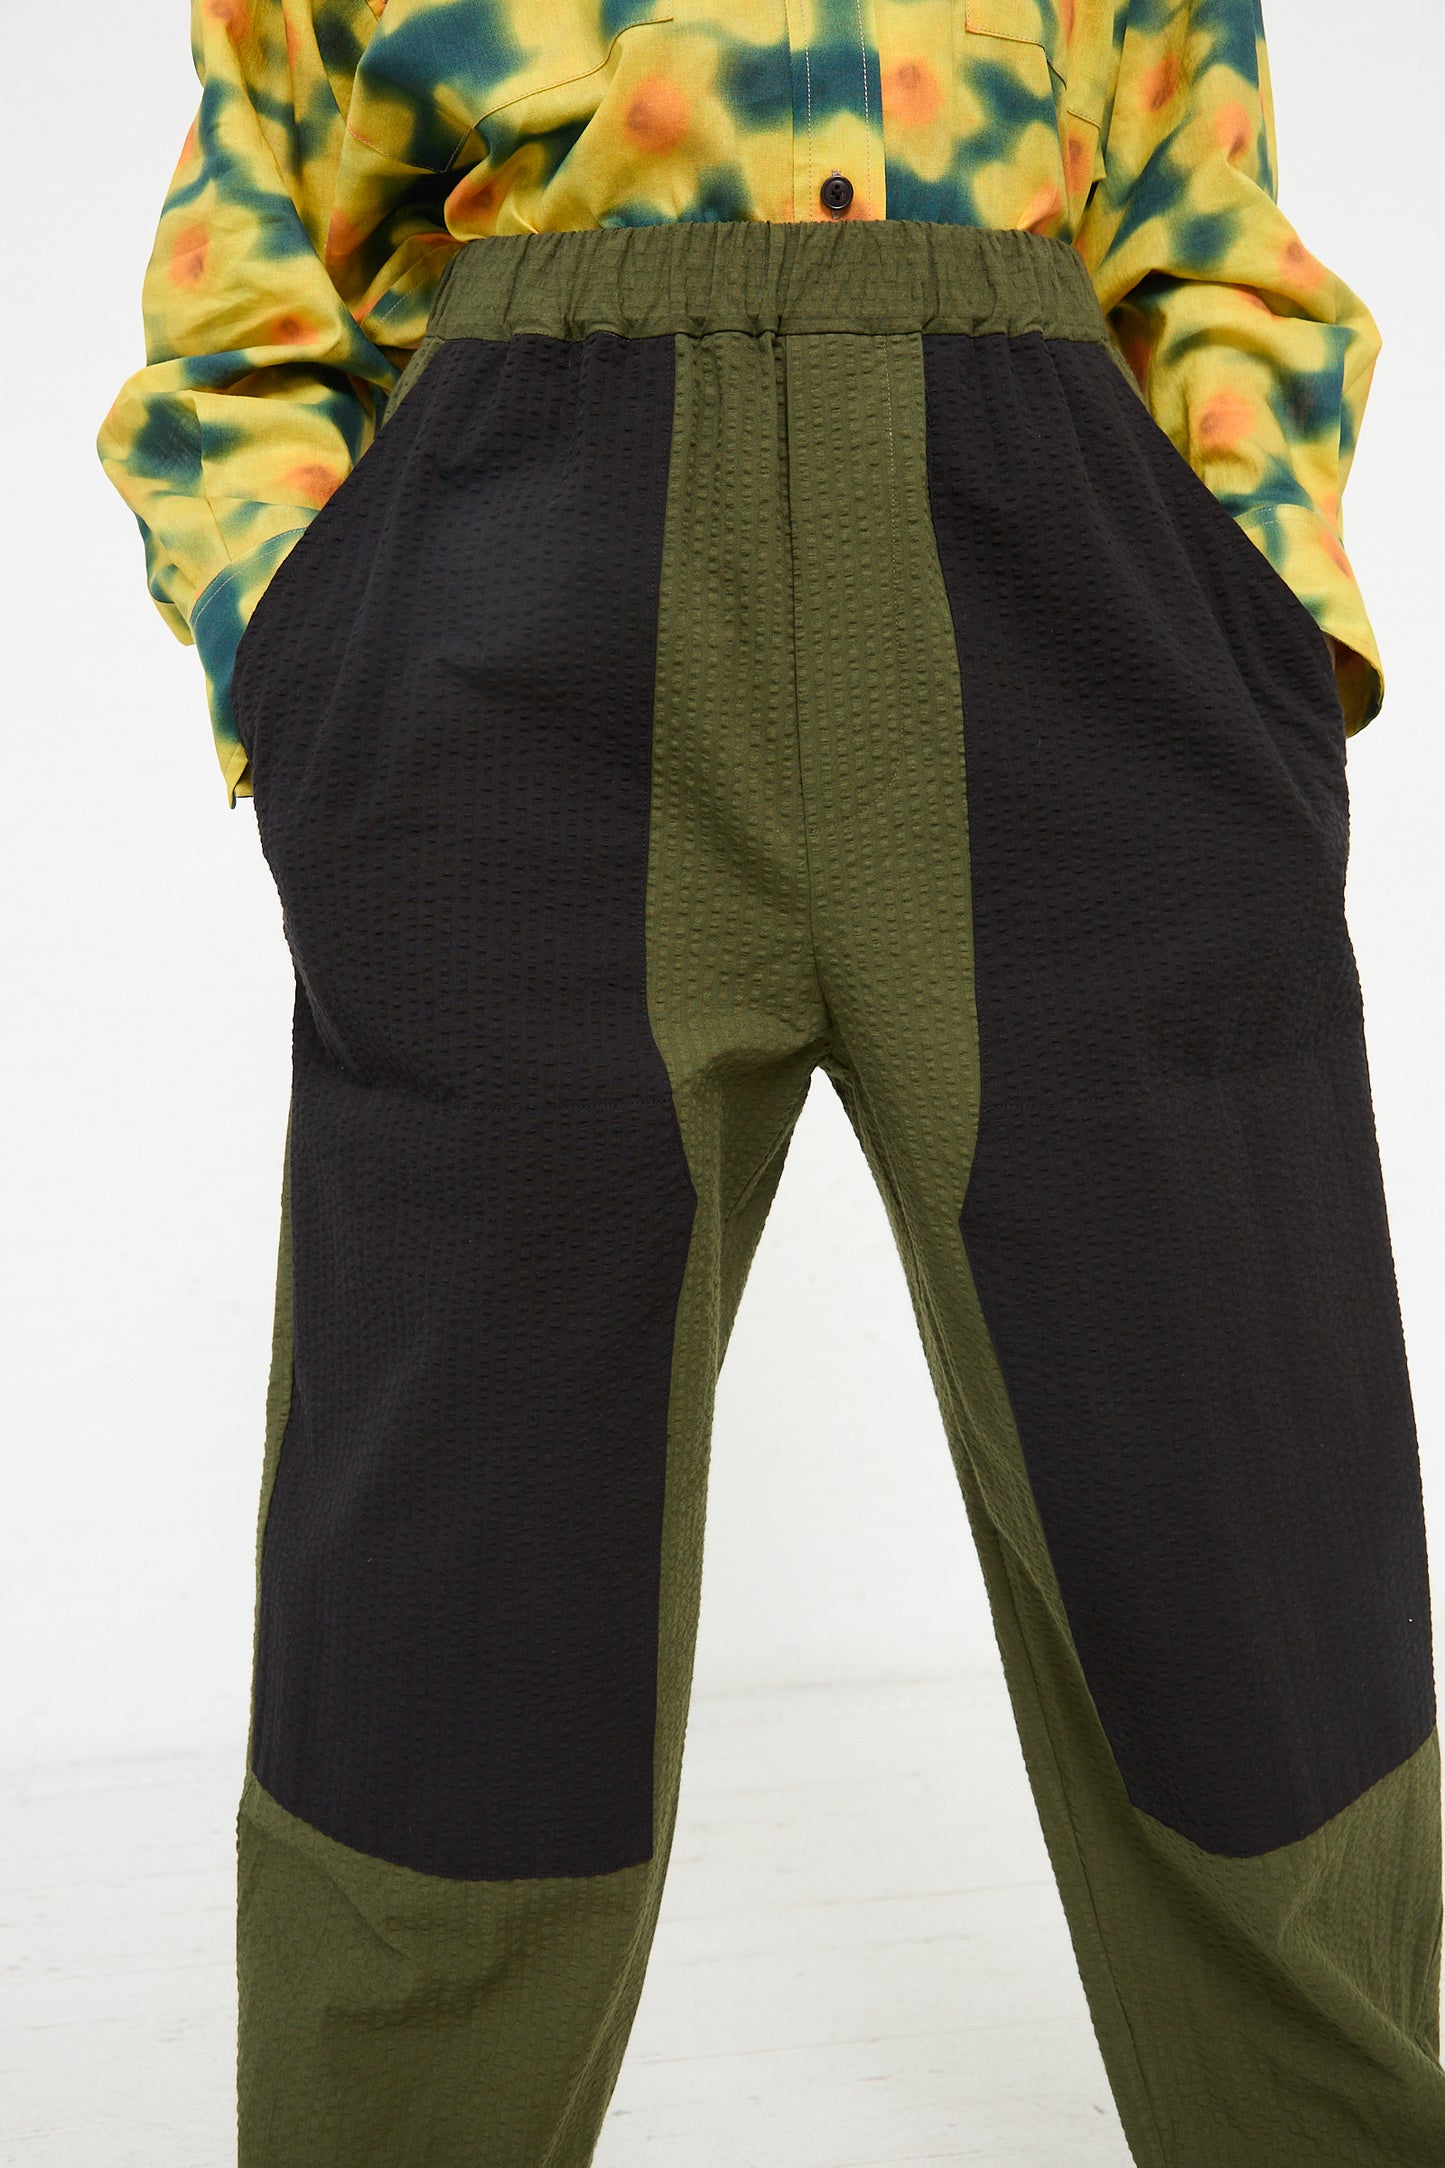 Two-tone KasMaria cotton seersucker work pants with an elastic waistband, displayed without the upper body visible.